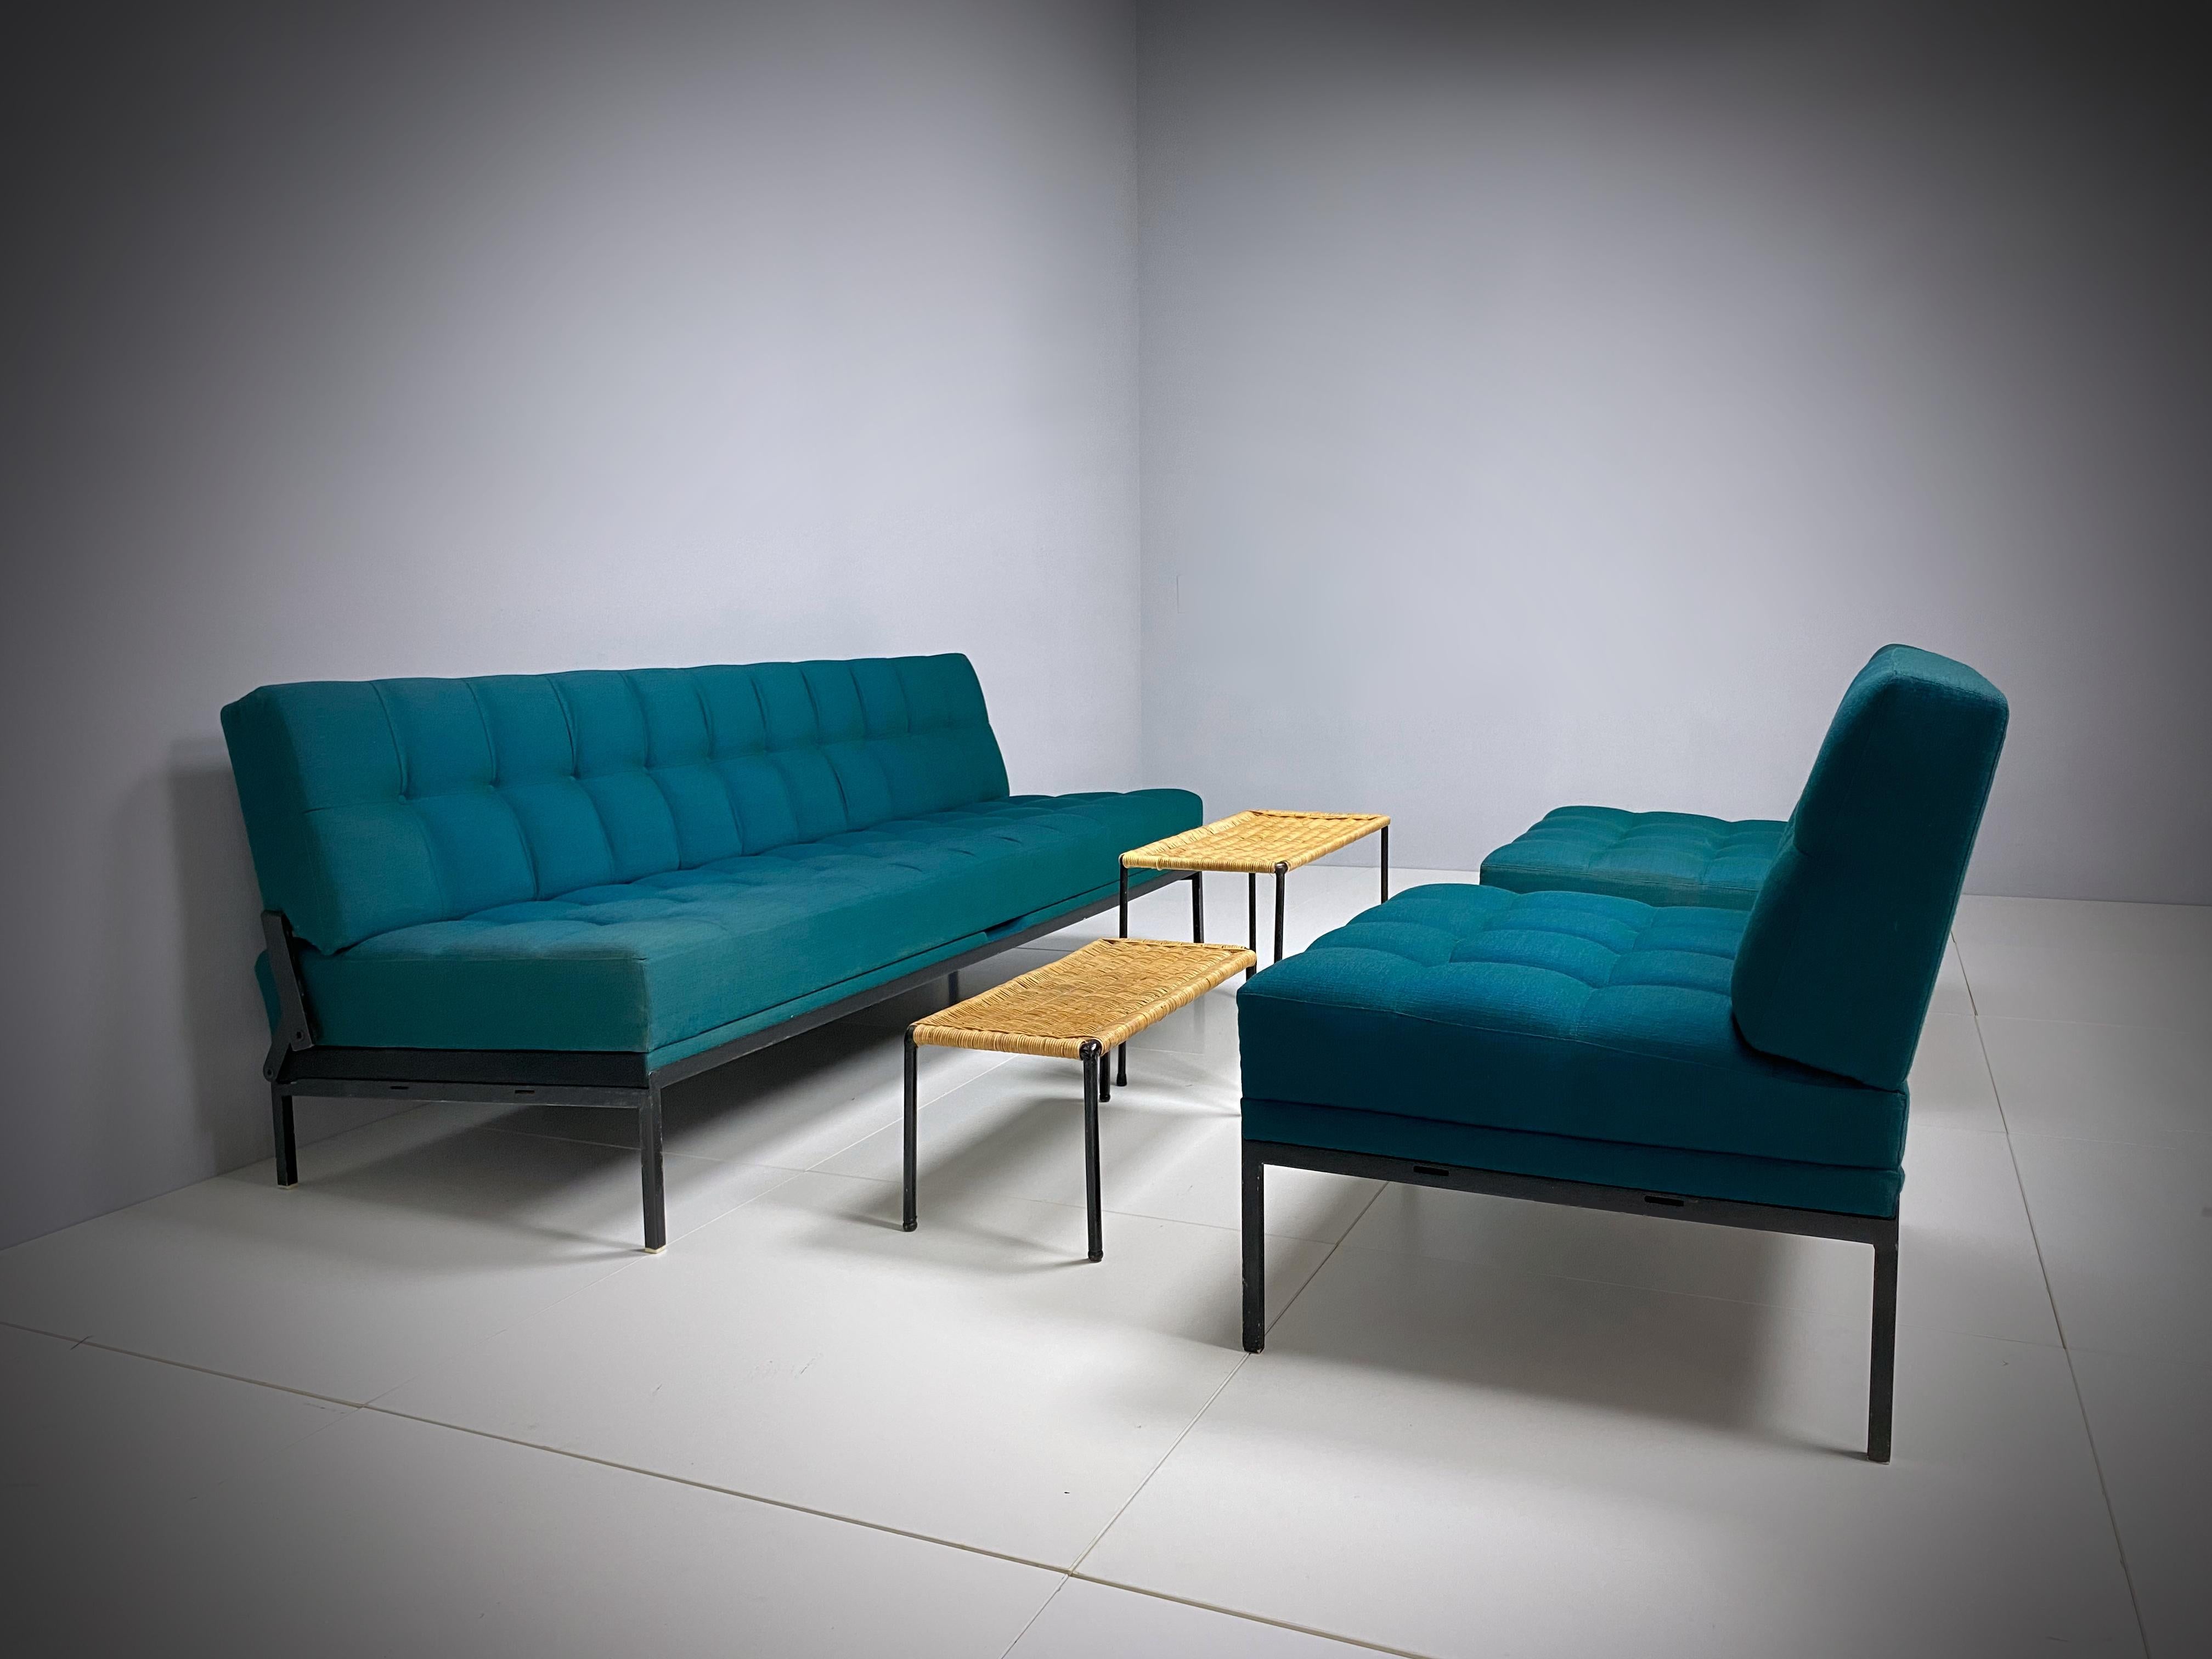 Hand-Crafted Wittmann Constanze Tufted Midcentury Sofa & Chairs by J. Spalt, 1970s, Austria For Sale